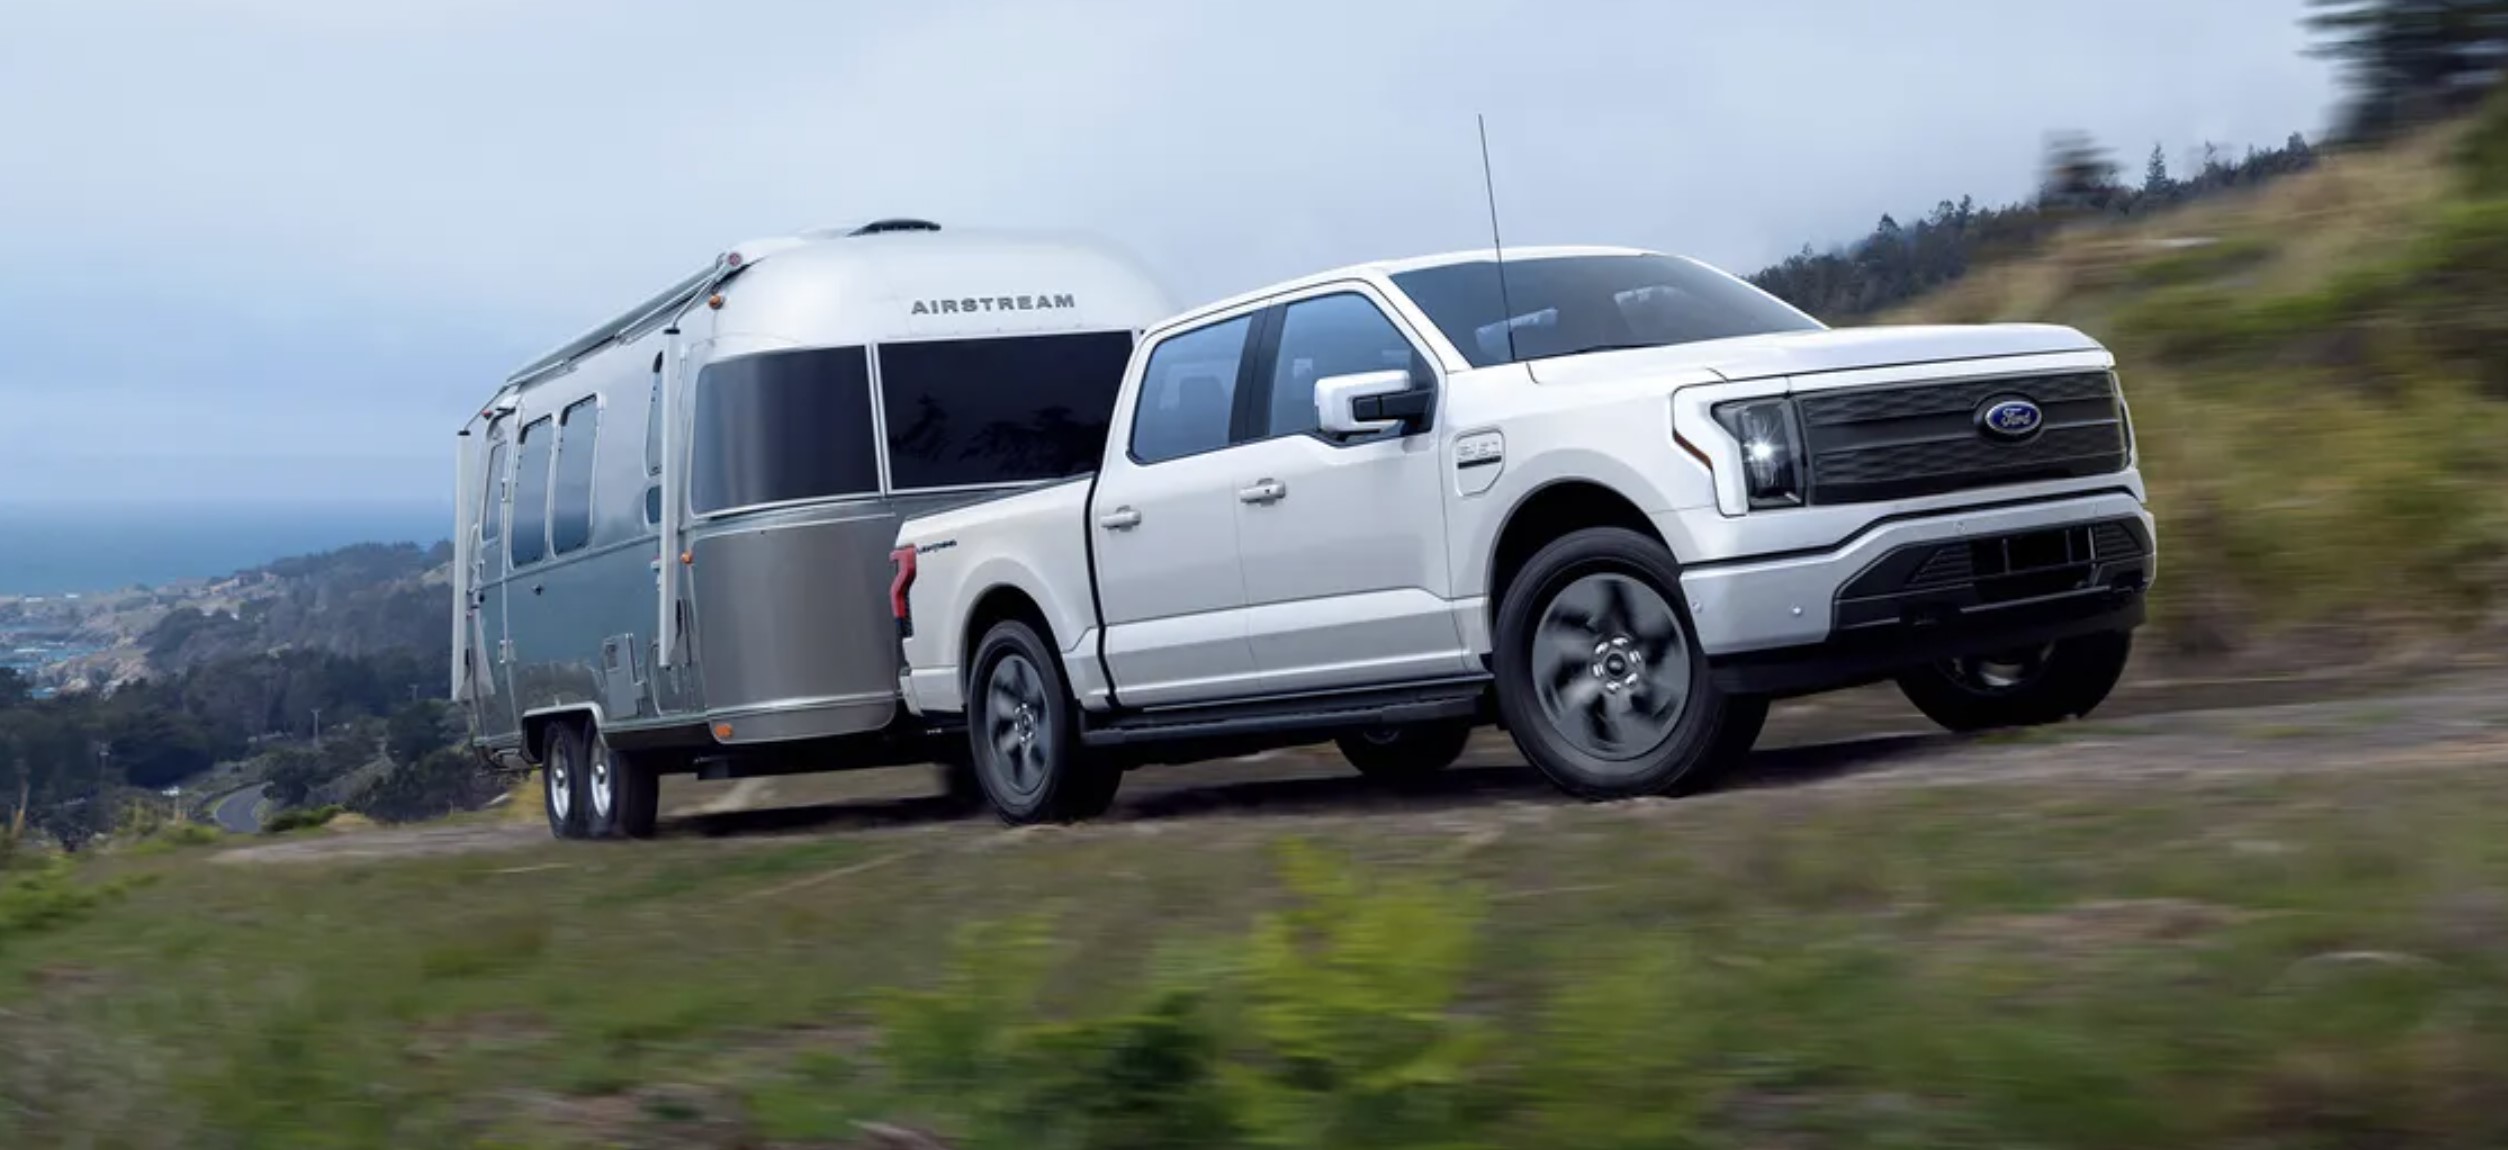 The 2022 Ford F-150 Lightning towing an RV up a curvy road